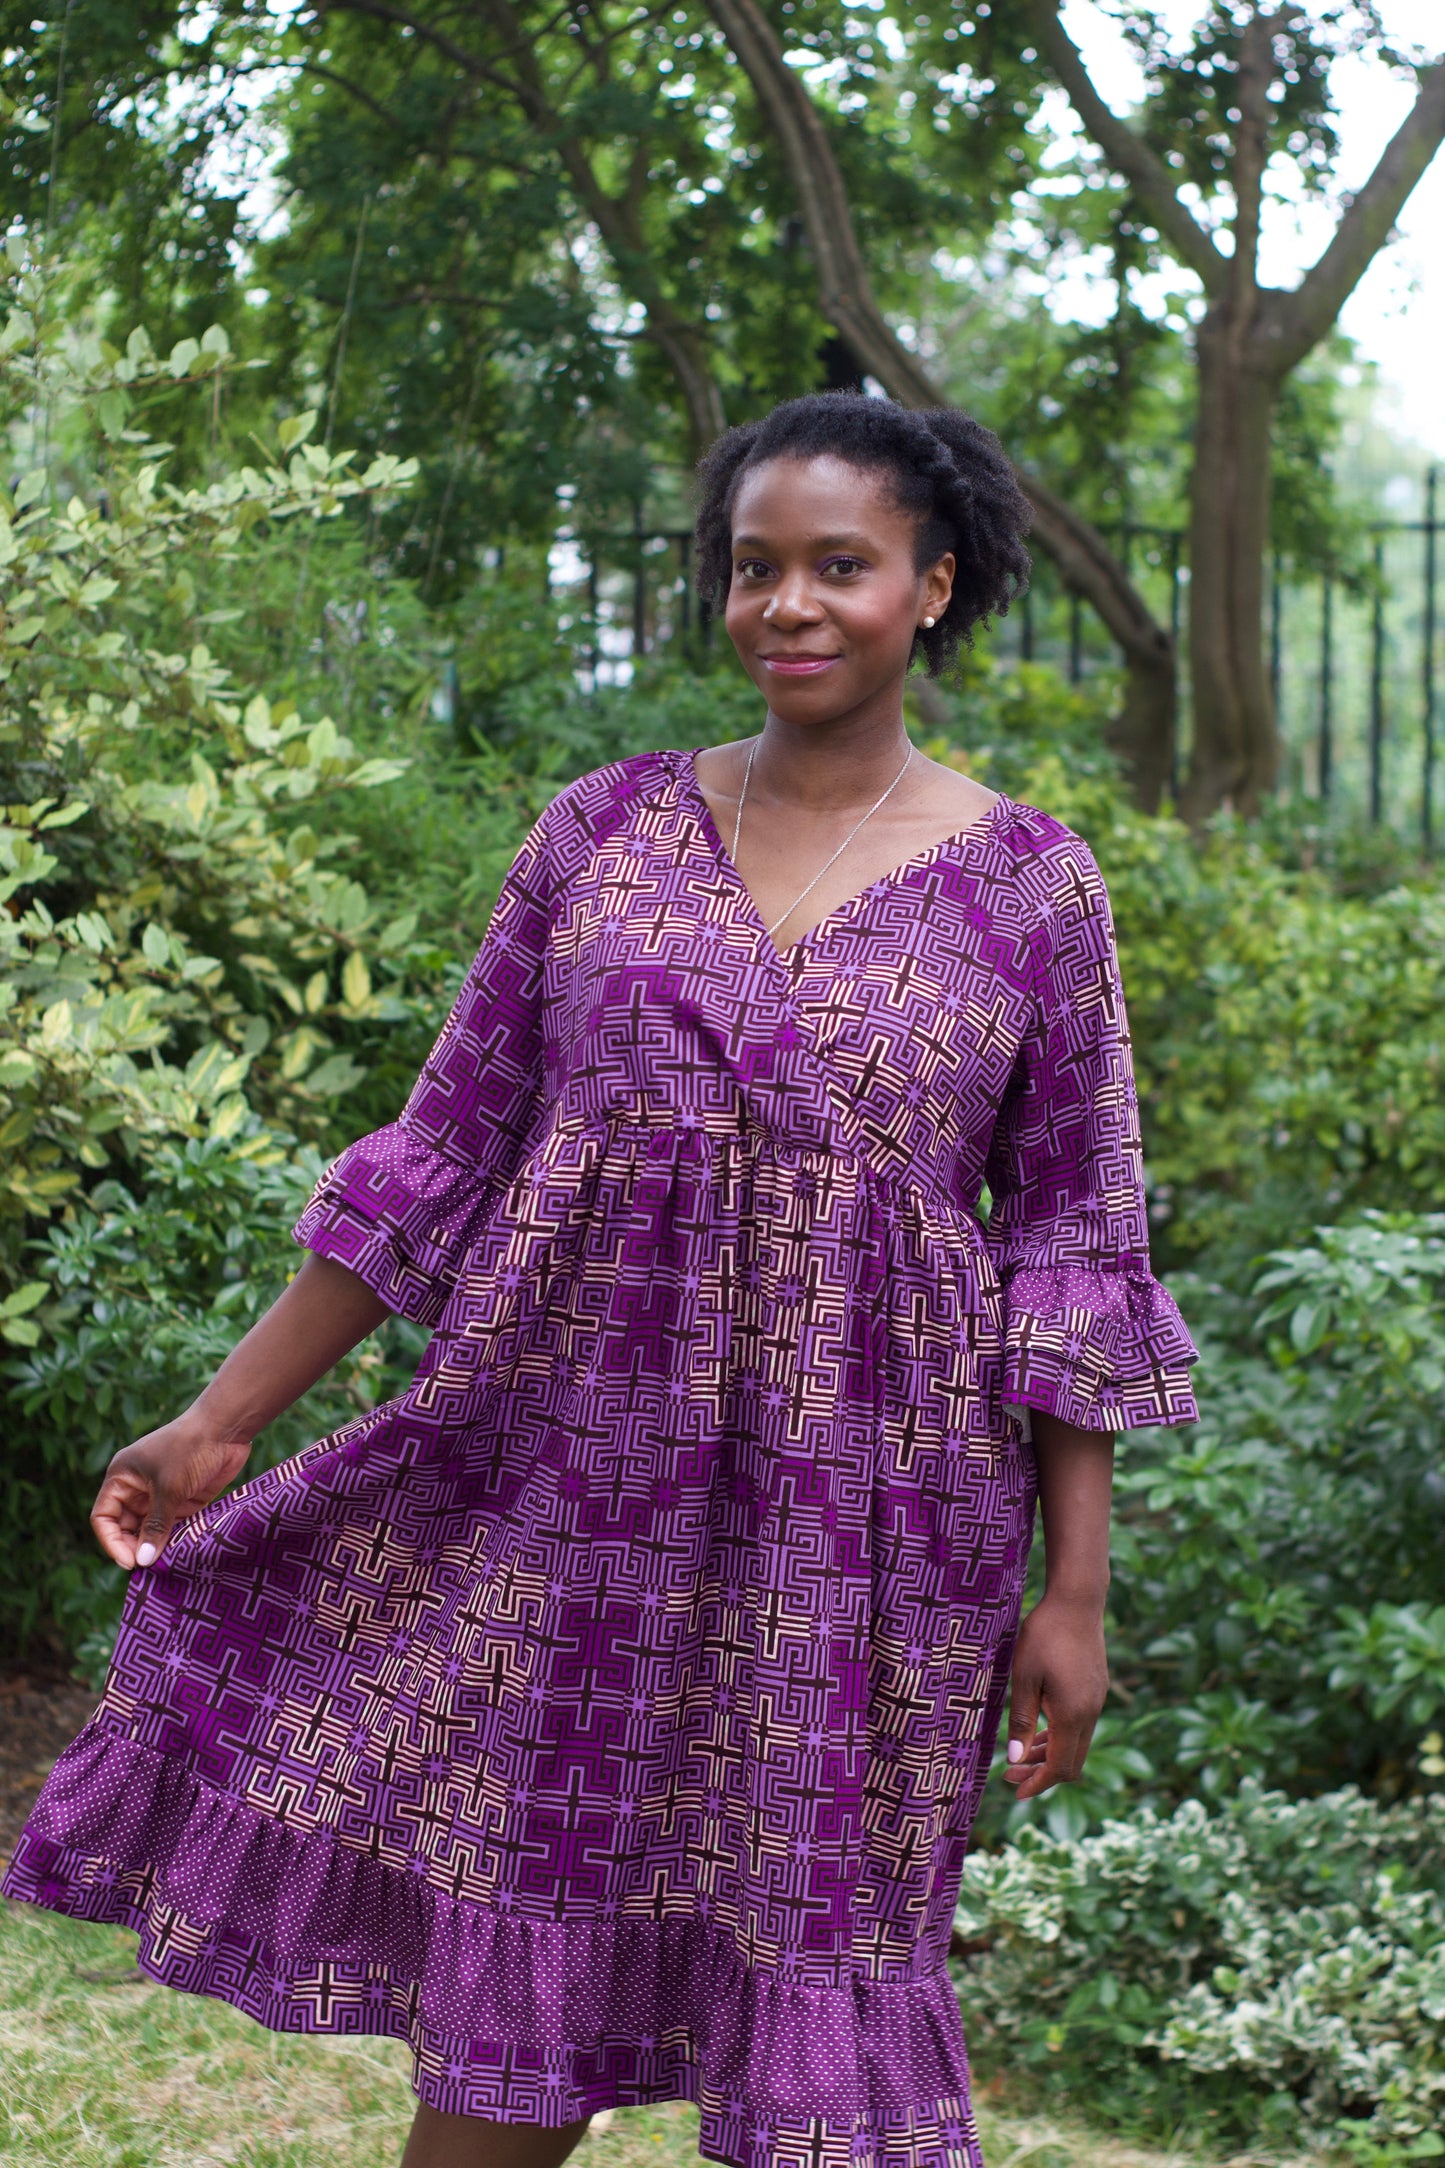 A woman playfully posing with the purple print ruffle dress, showcasing its flowing nature and elegance, while surrounded by nature.